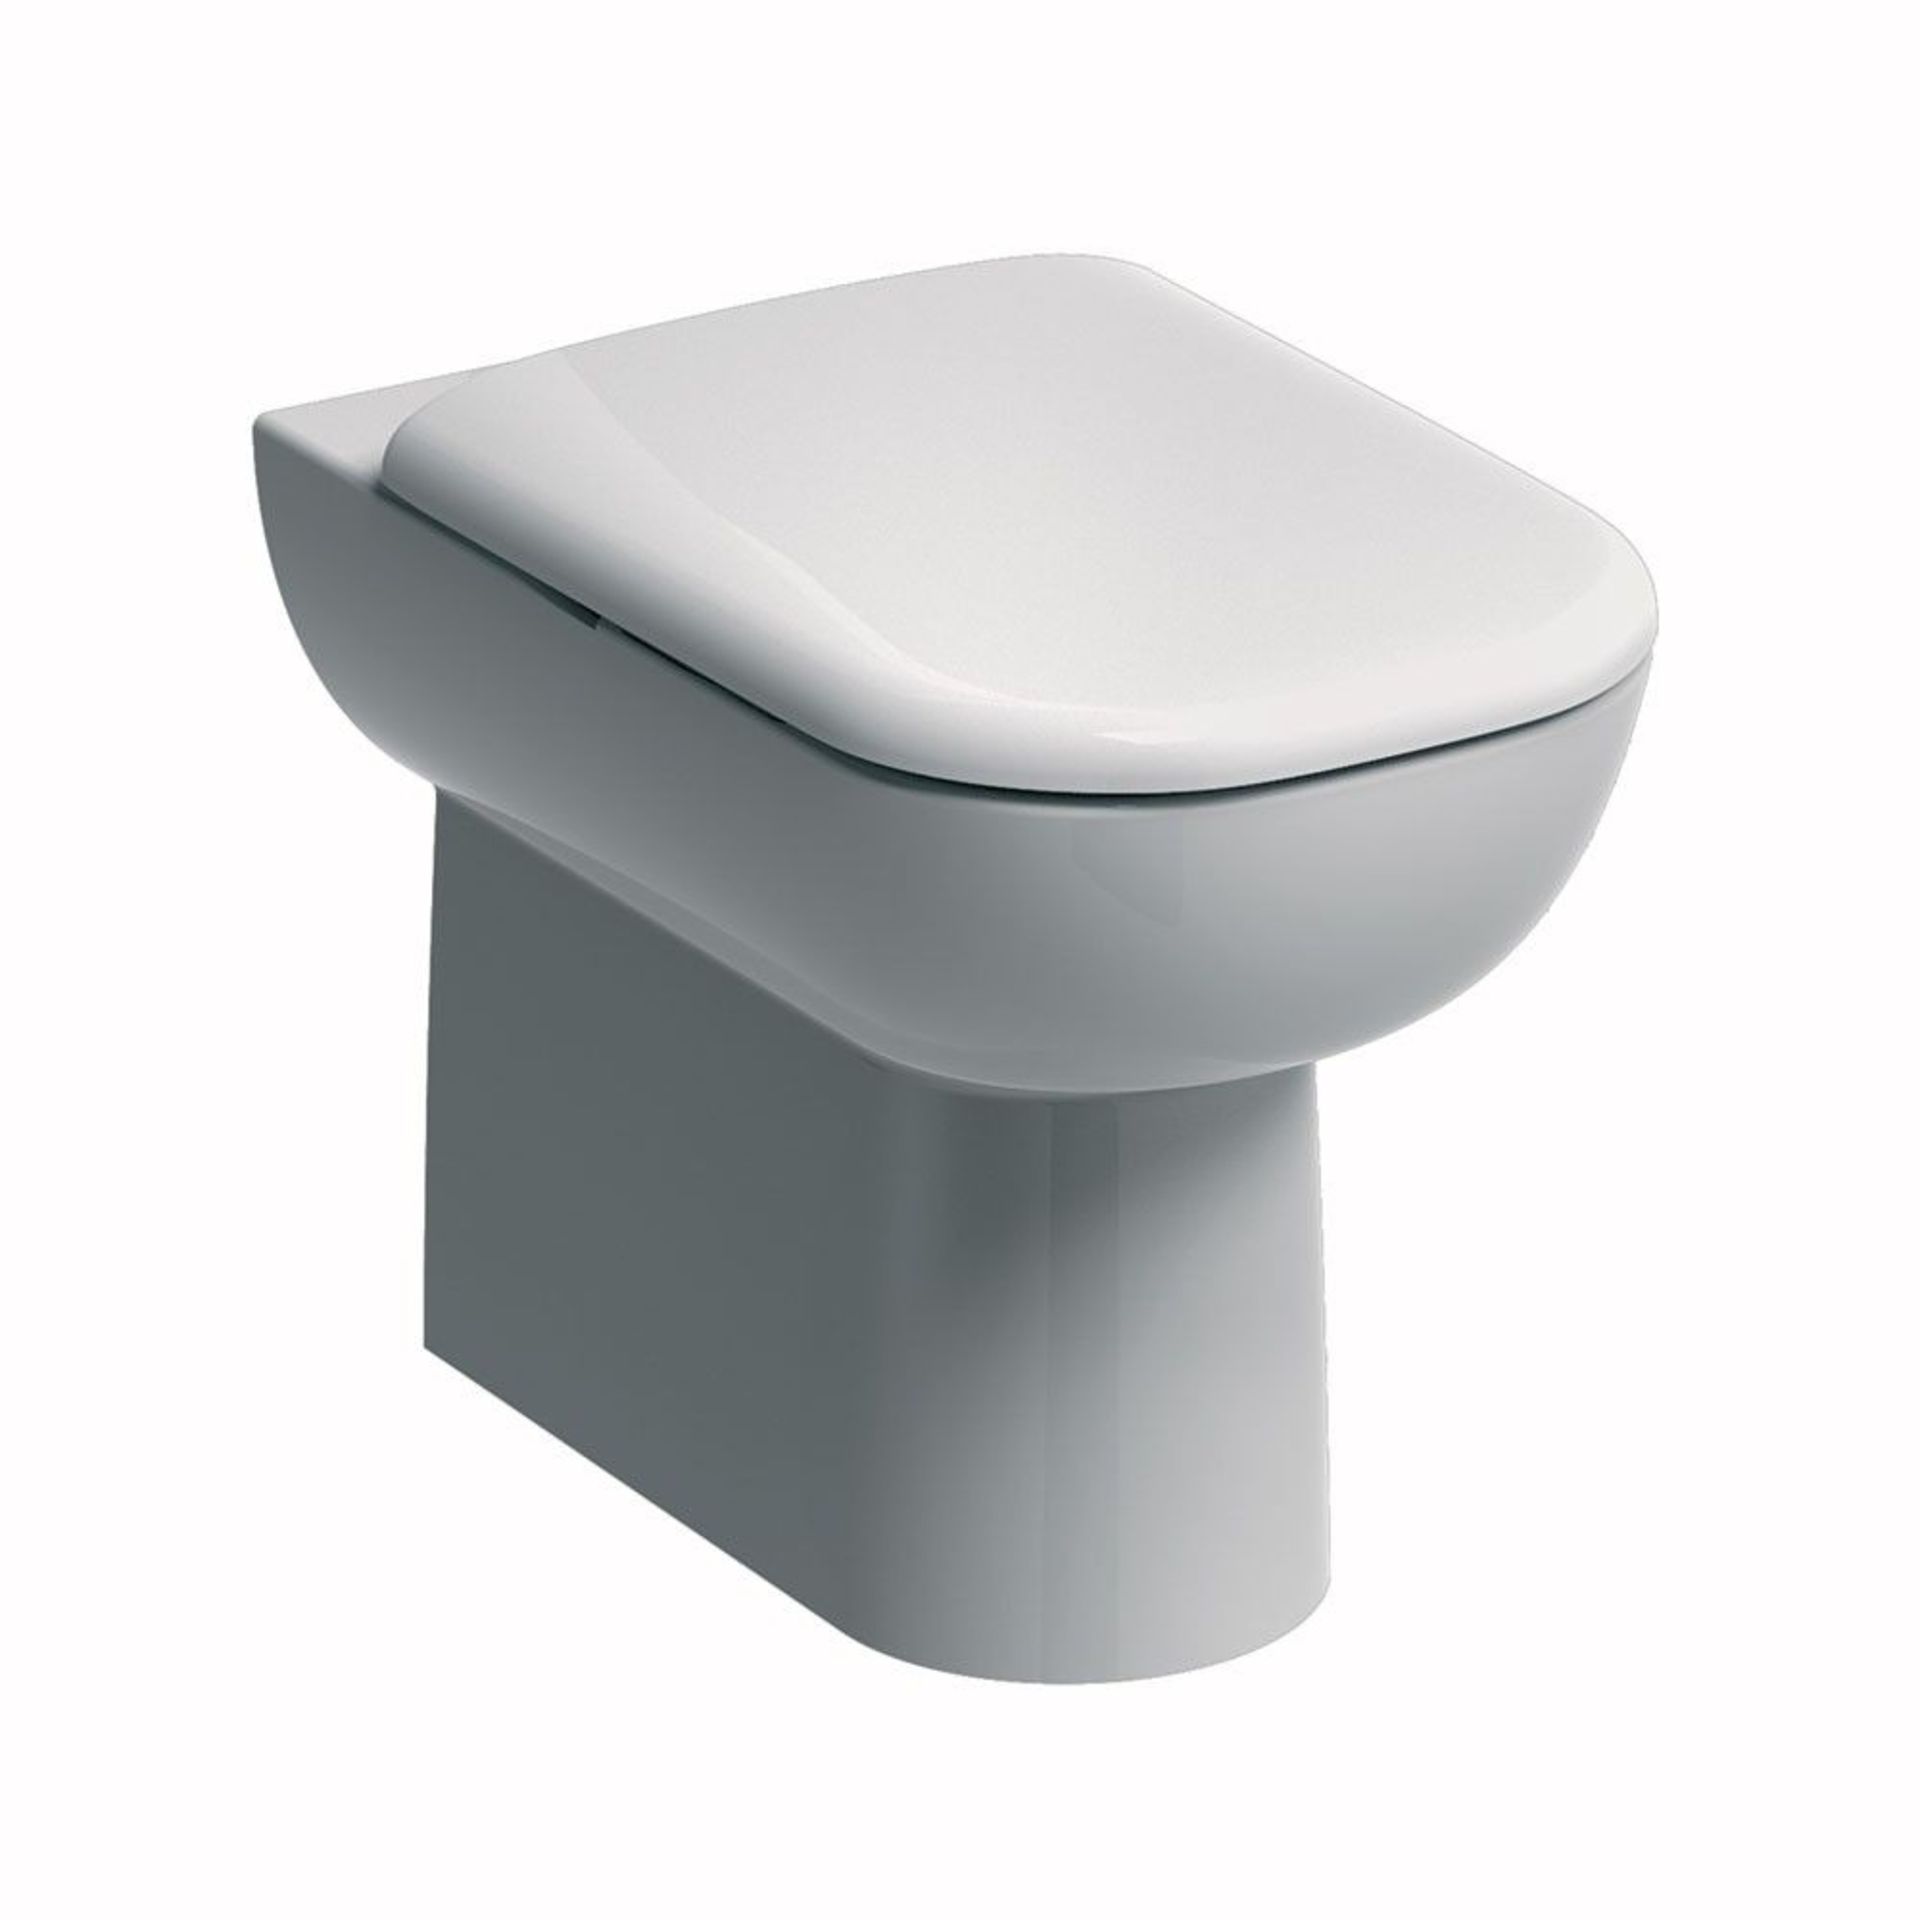 Twyford E500 Round Back to Wall Toilet RRP £200 - Image 4 of 6